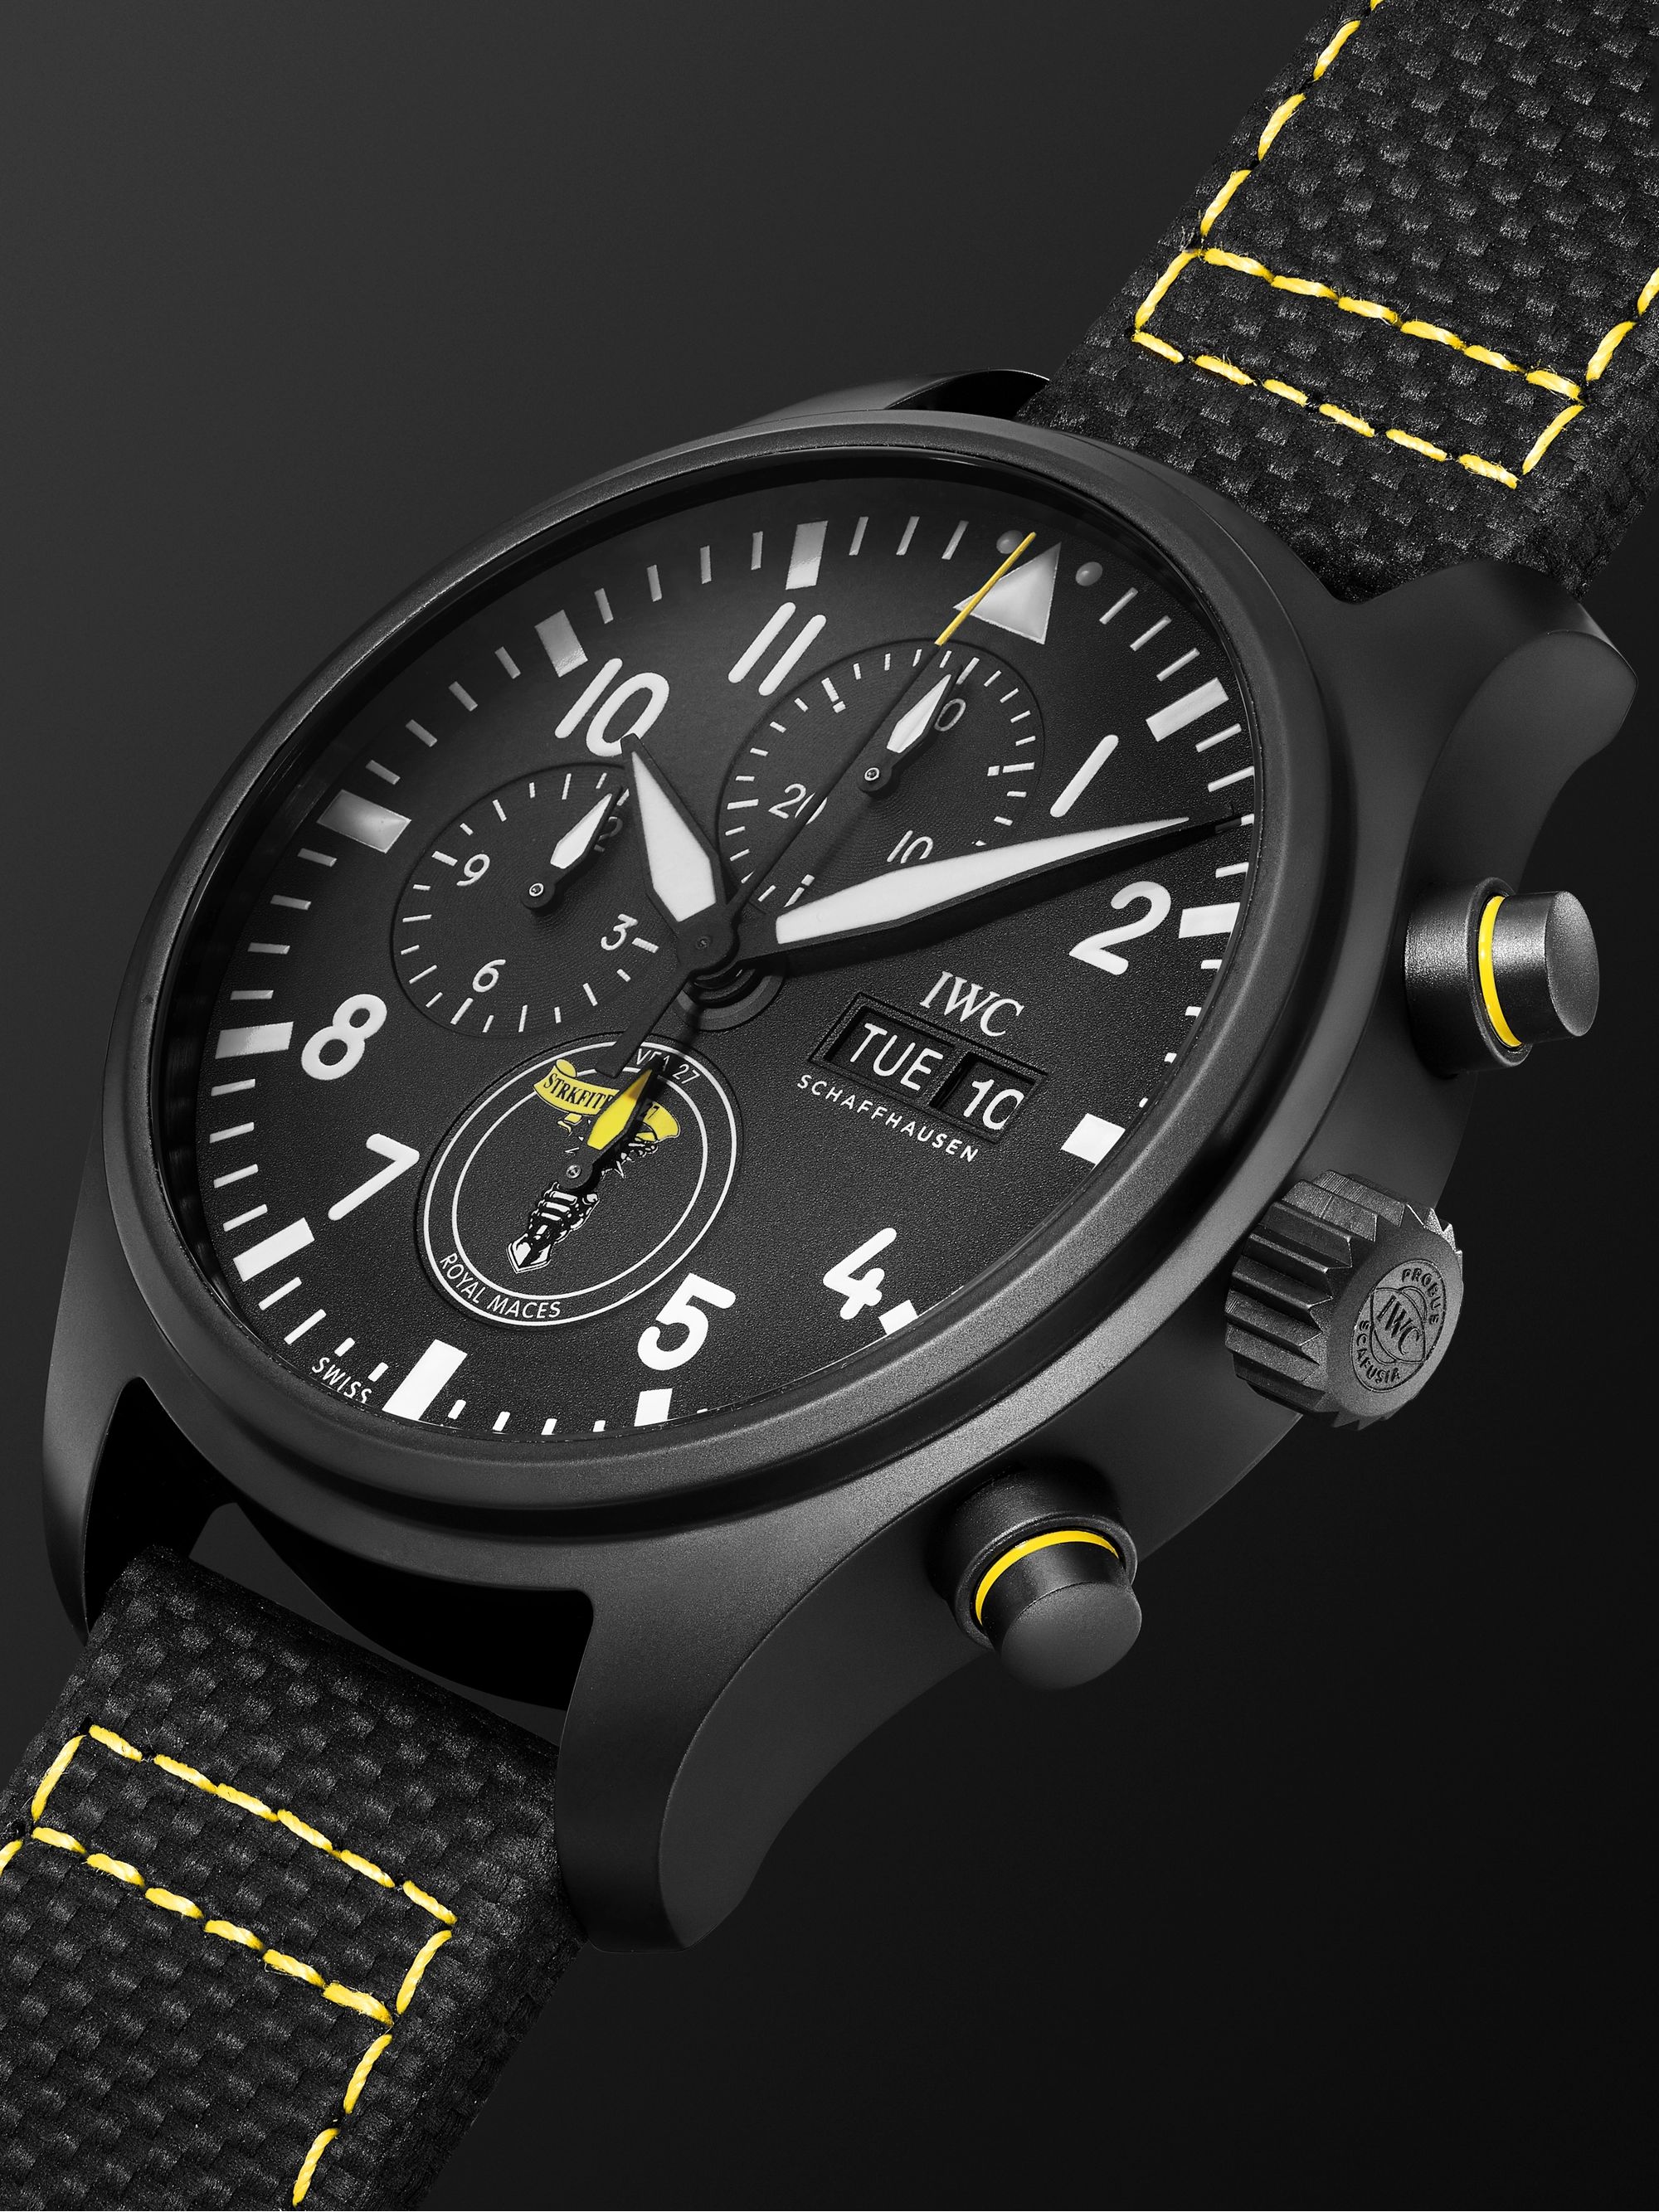 IWC SCHAFFHAUSEN Pilot's Royal Maces Automatic Chronograph 44.5mm Ceramic and Leather Watch, Ref. No. IW389107